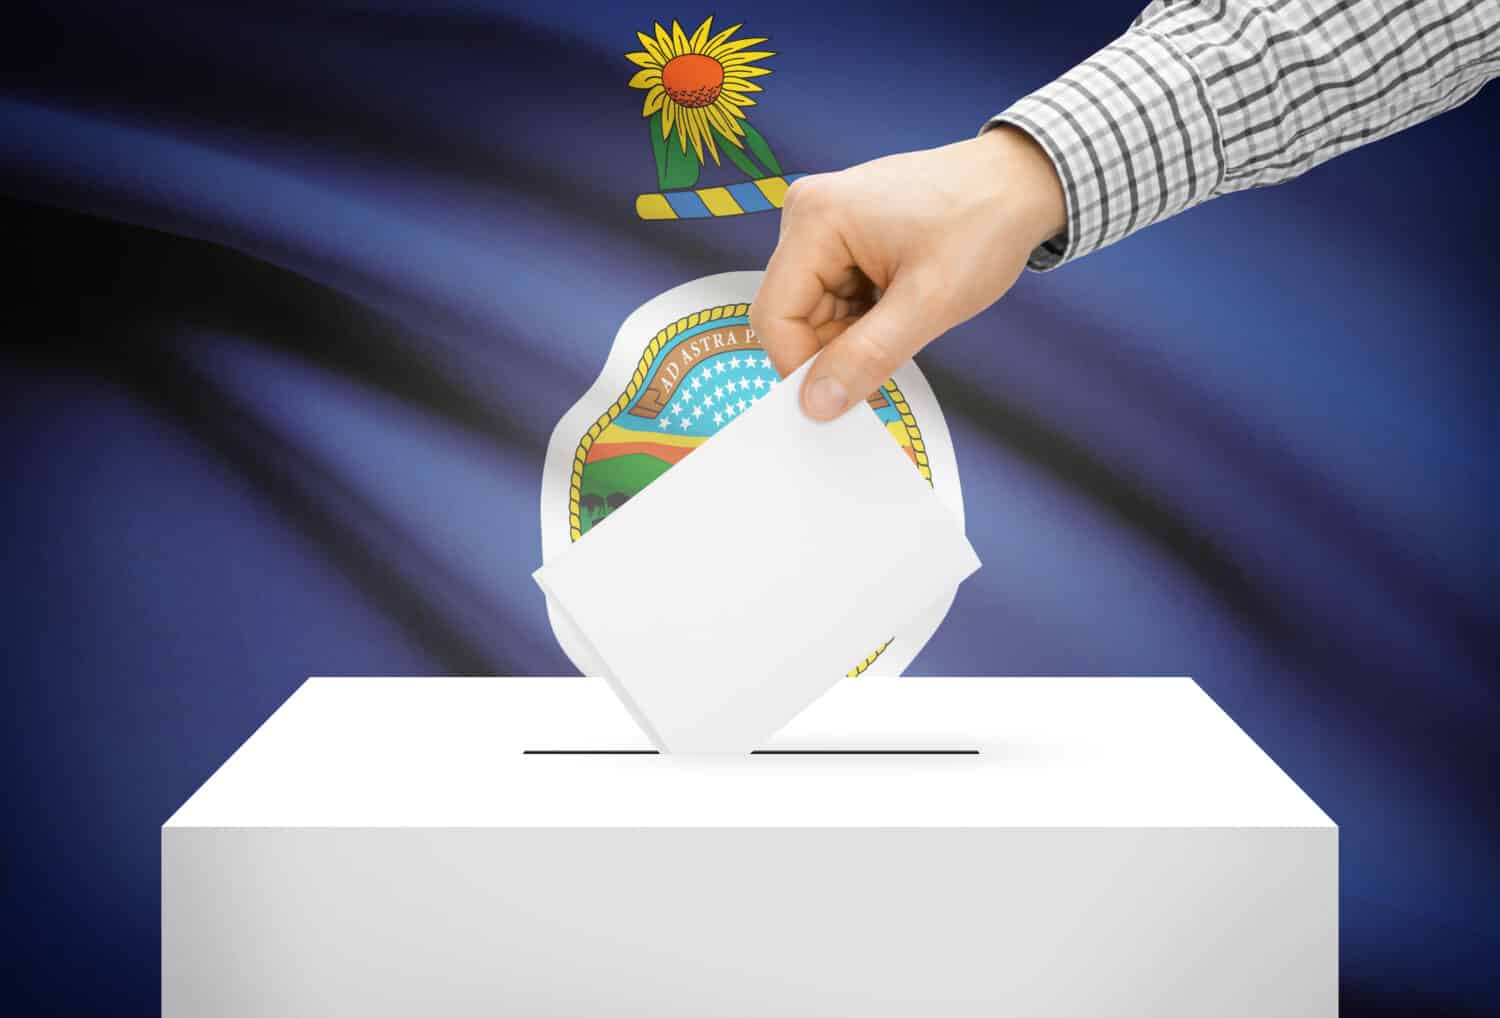 Voting concept - Ballot box with national flag on background - Kansas